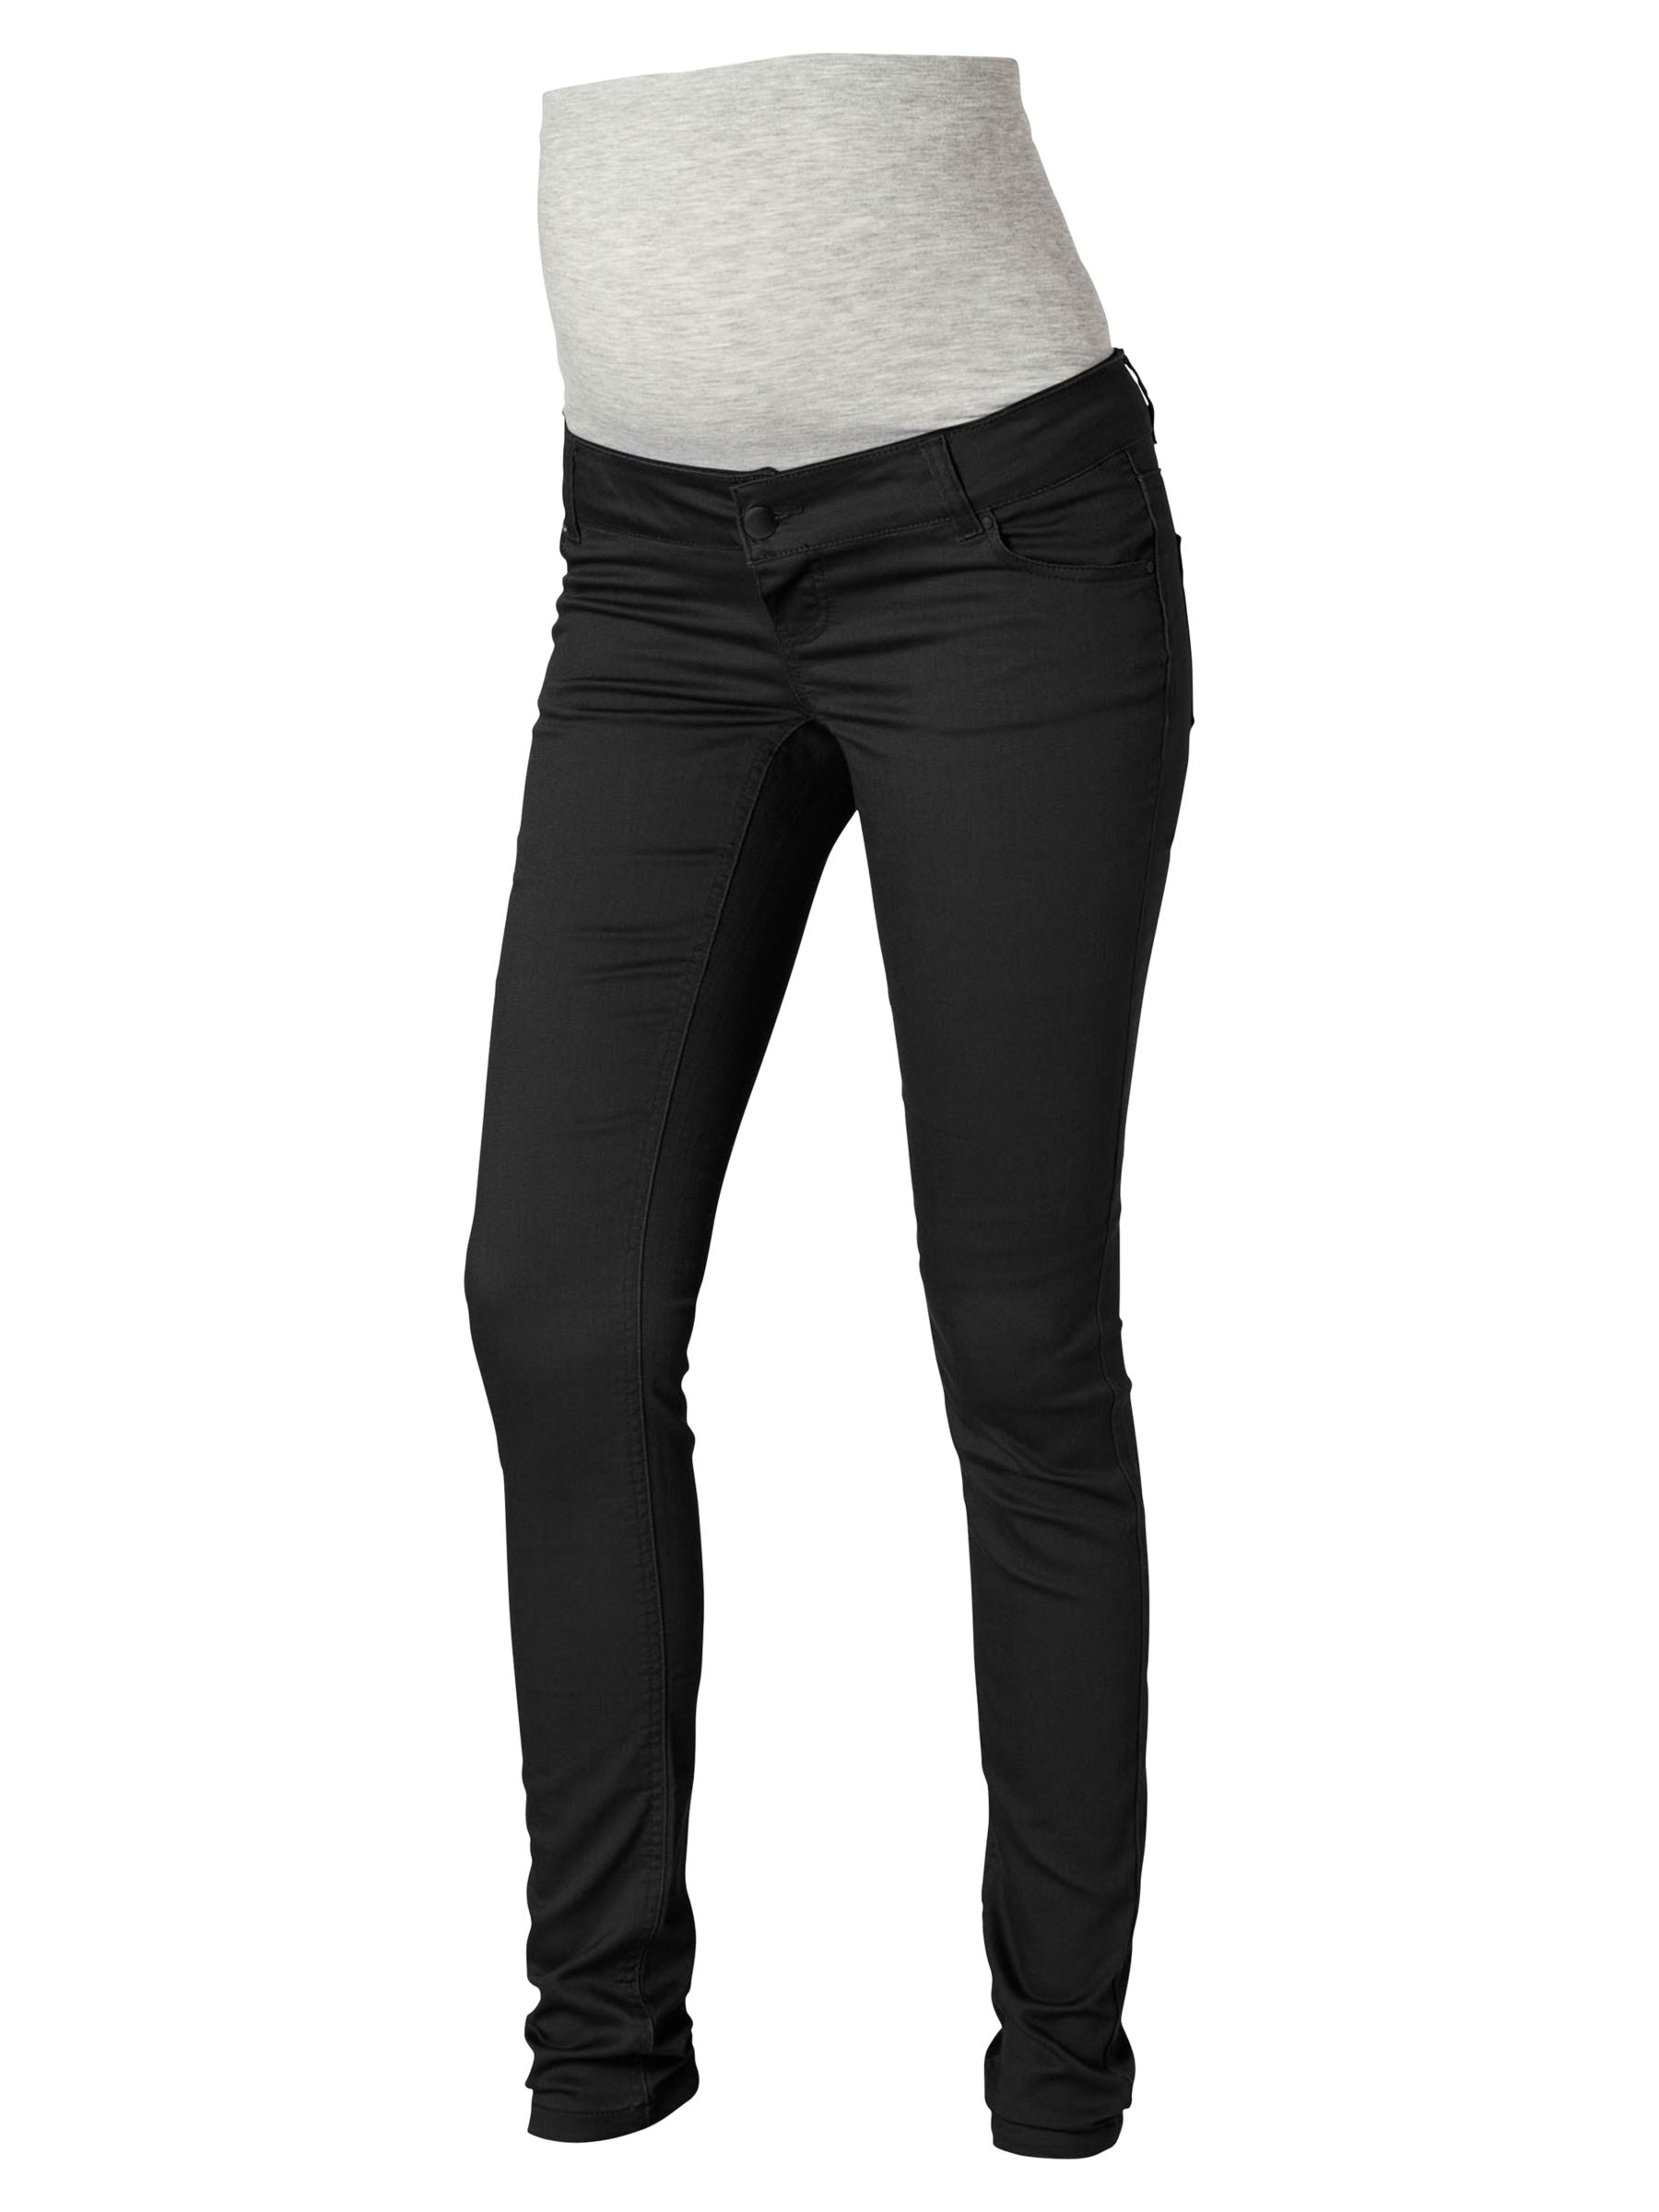 Mamalicious Noos Shelly Slim Fit Maternity Jeans, Black